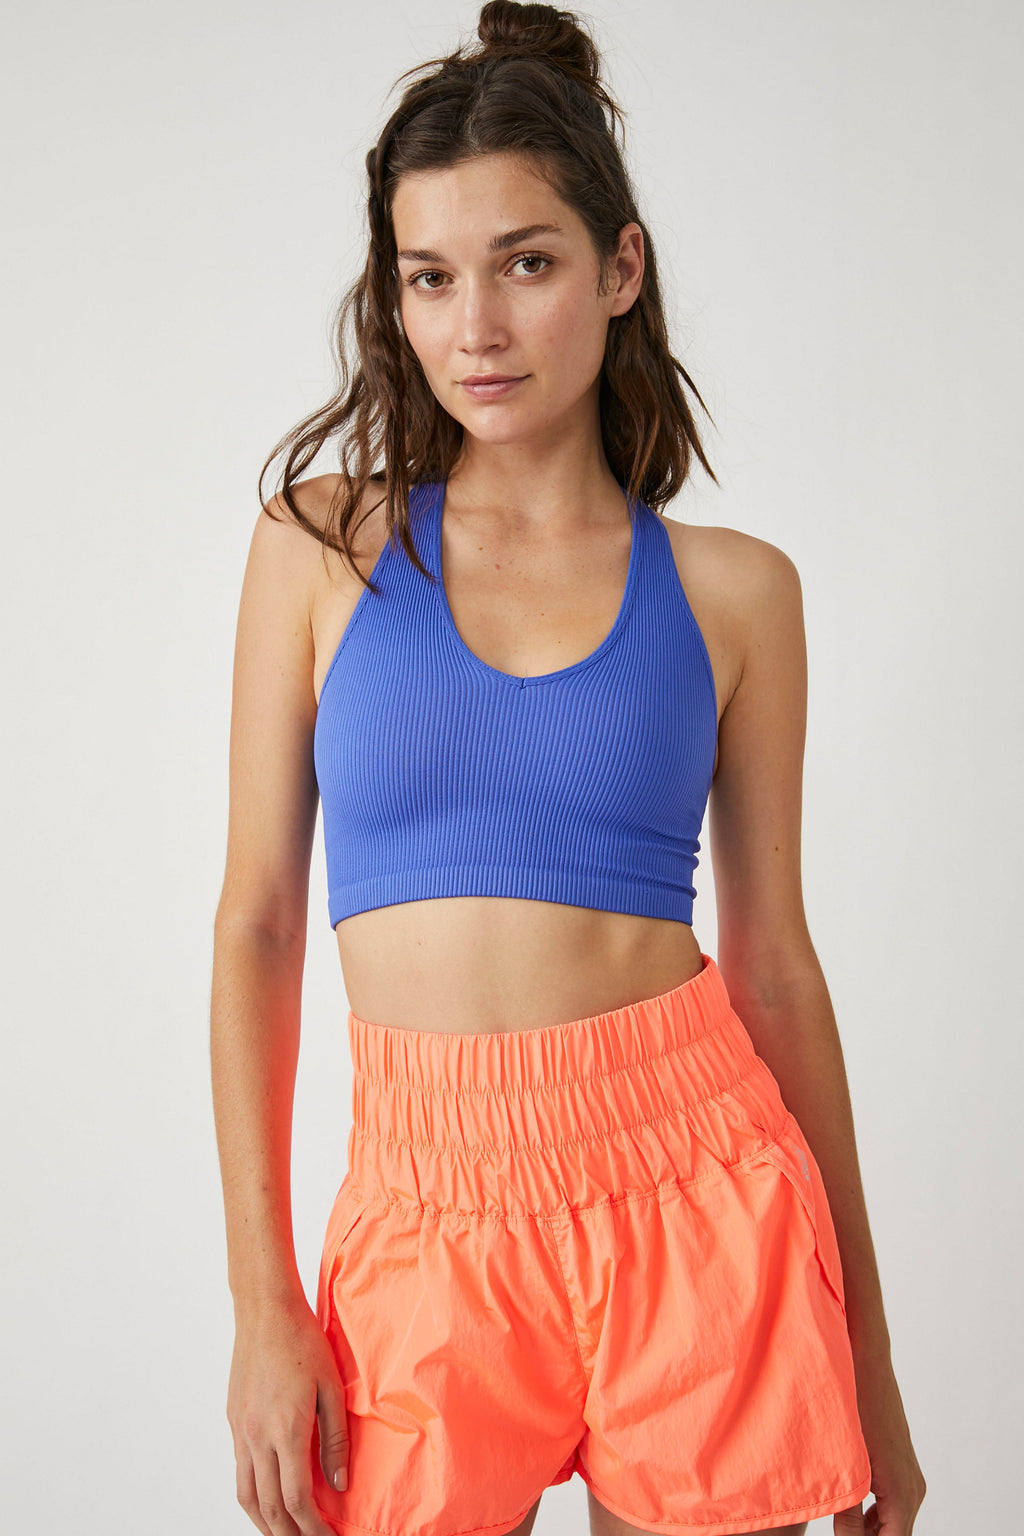 FREE PEOPLE MOVEMENT FREE THROW CROP - BLUE IRIS 6007 – Work It Out